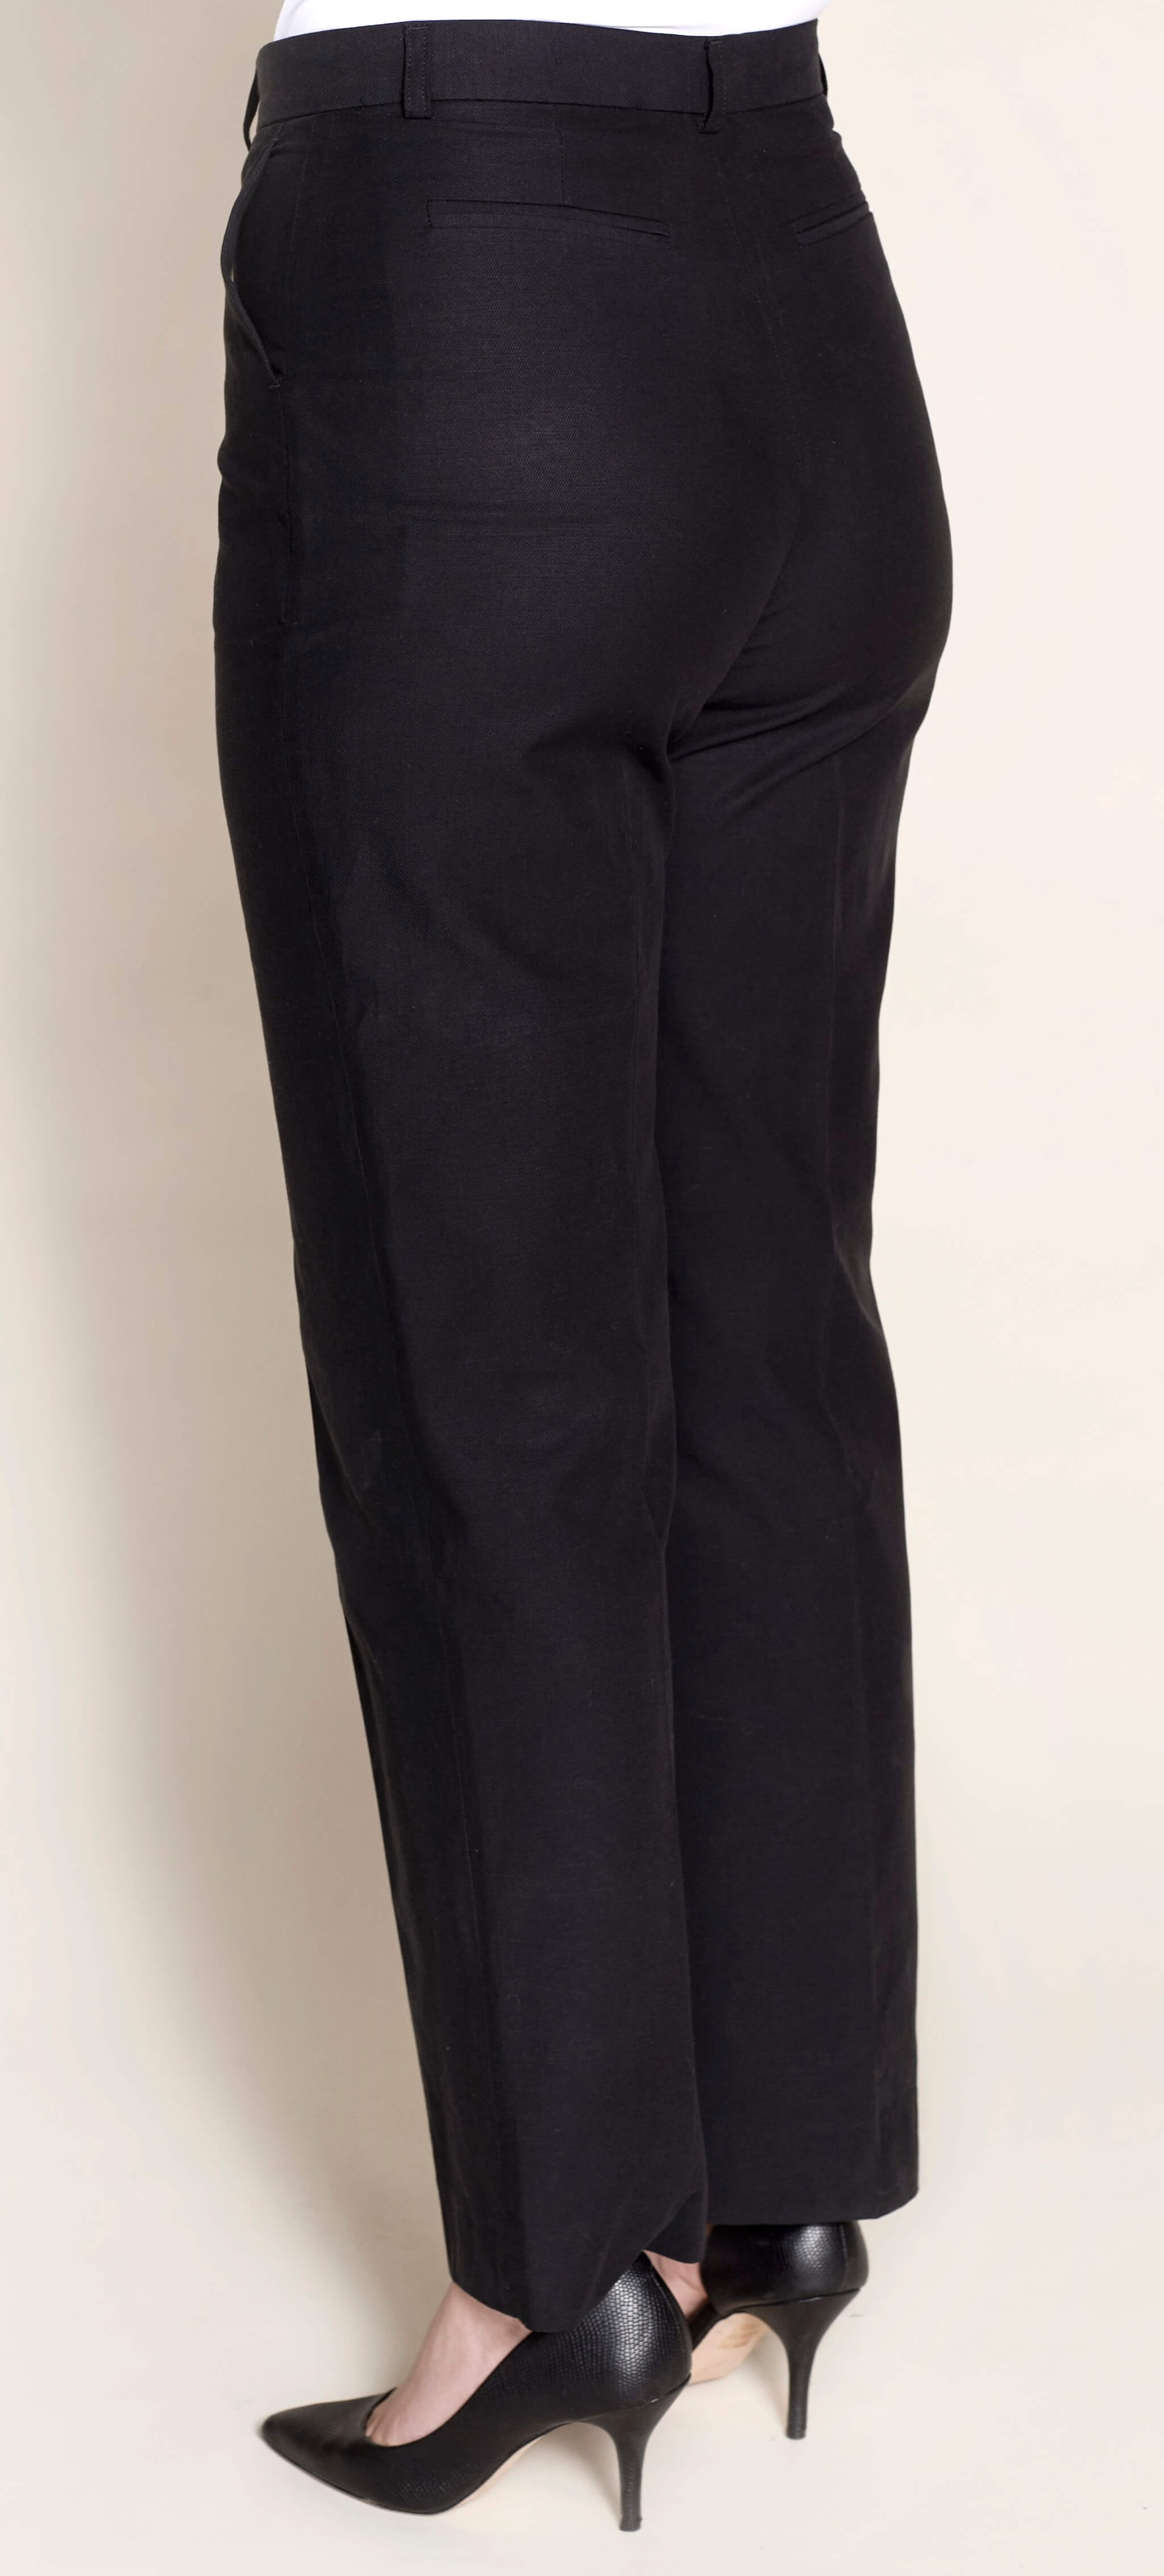 Side view of a model in Cyme Copenhagen's tailored black lyocell trousers available in plus-size, highlighting a nice fit with a sleek design, embodying the essence of sustainable and timeless Scandinavian fashion.